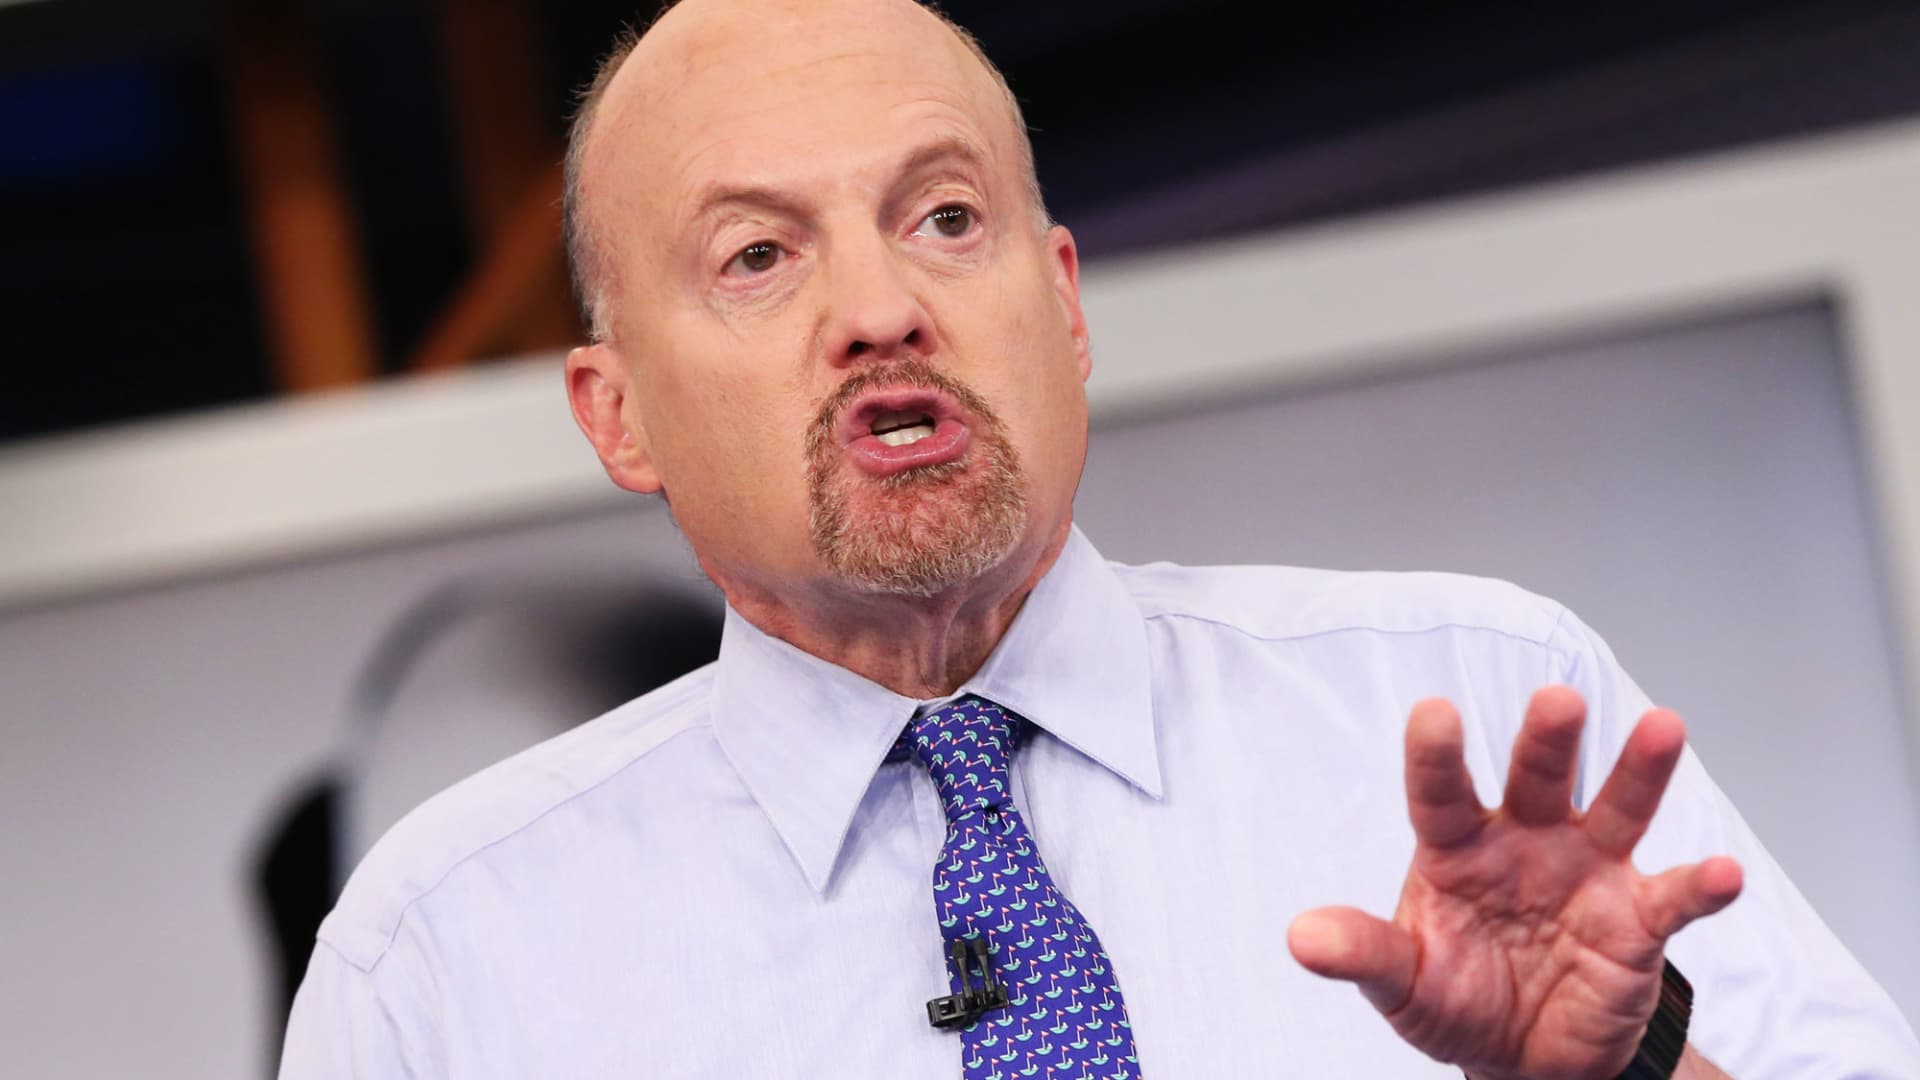 Jim Cramer says the market needs a solid earnings season after Thursday's hotter-than-expected inflation numbers